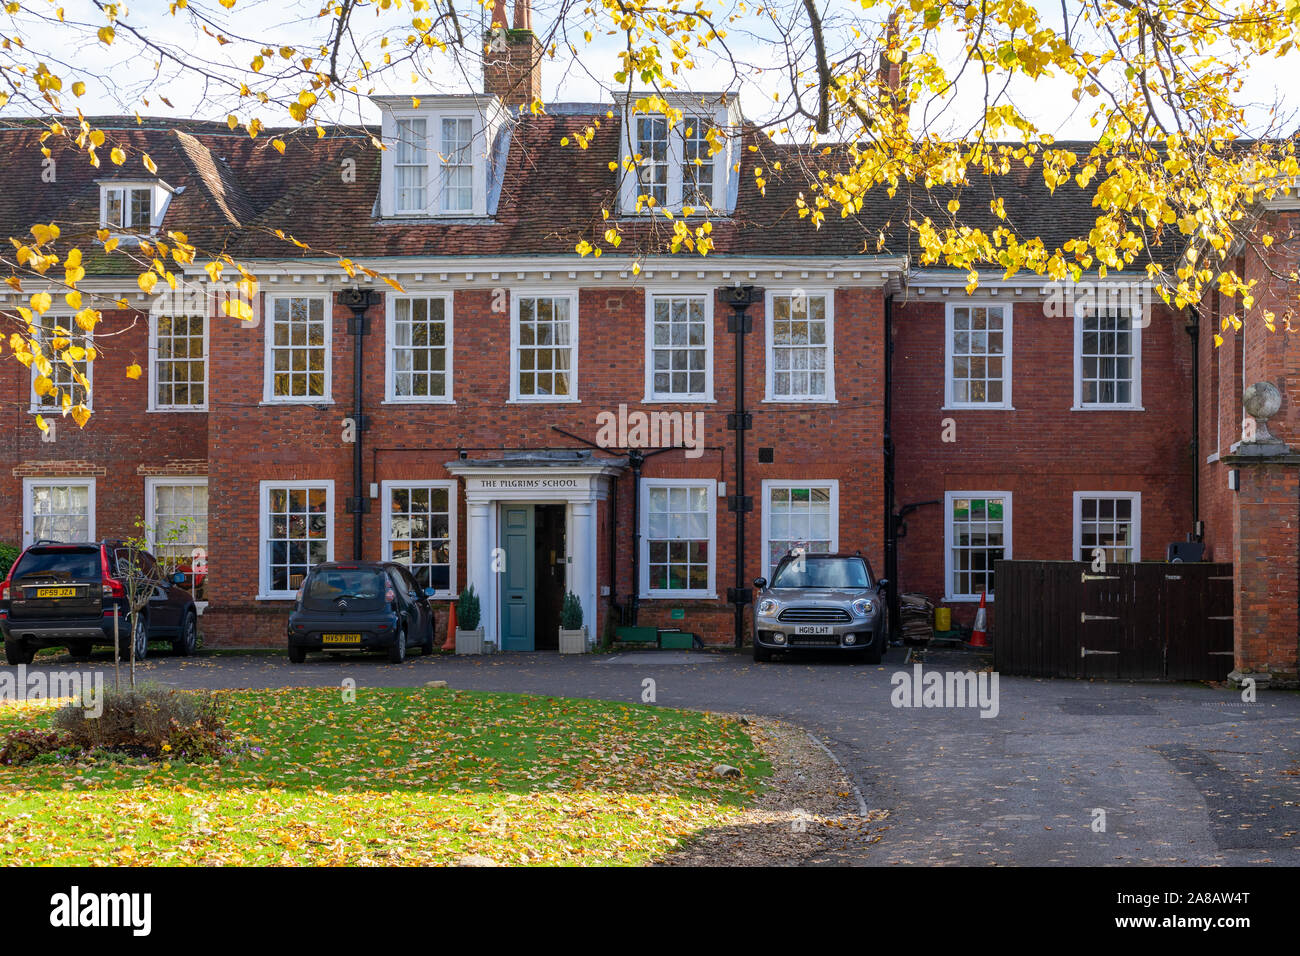 The exterior of The Pilgrims school in winchester, Hampshire, UK Stock Photo